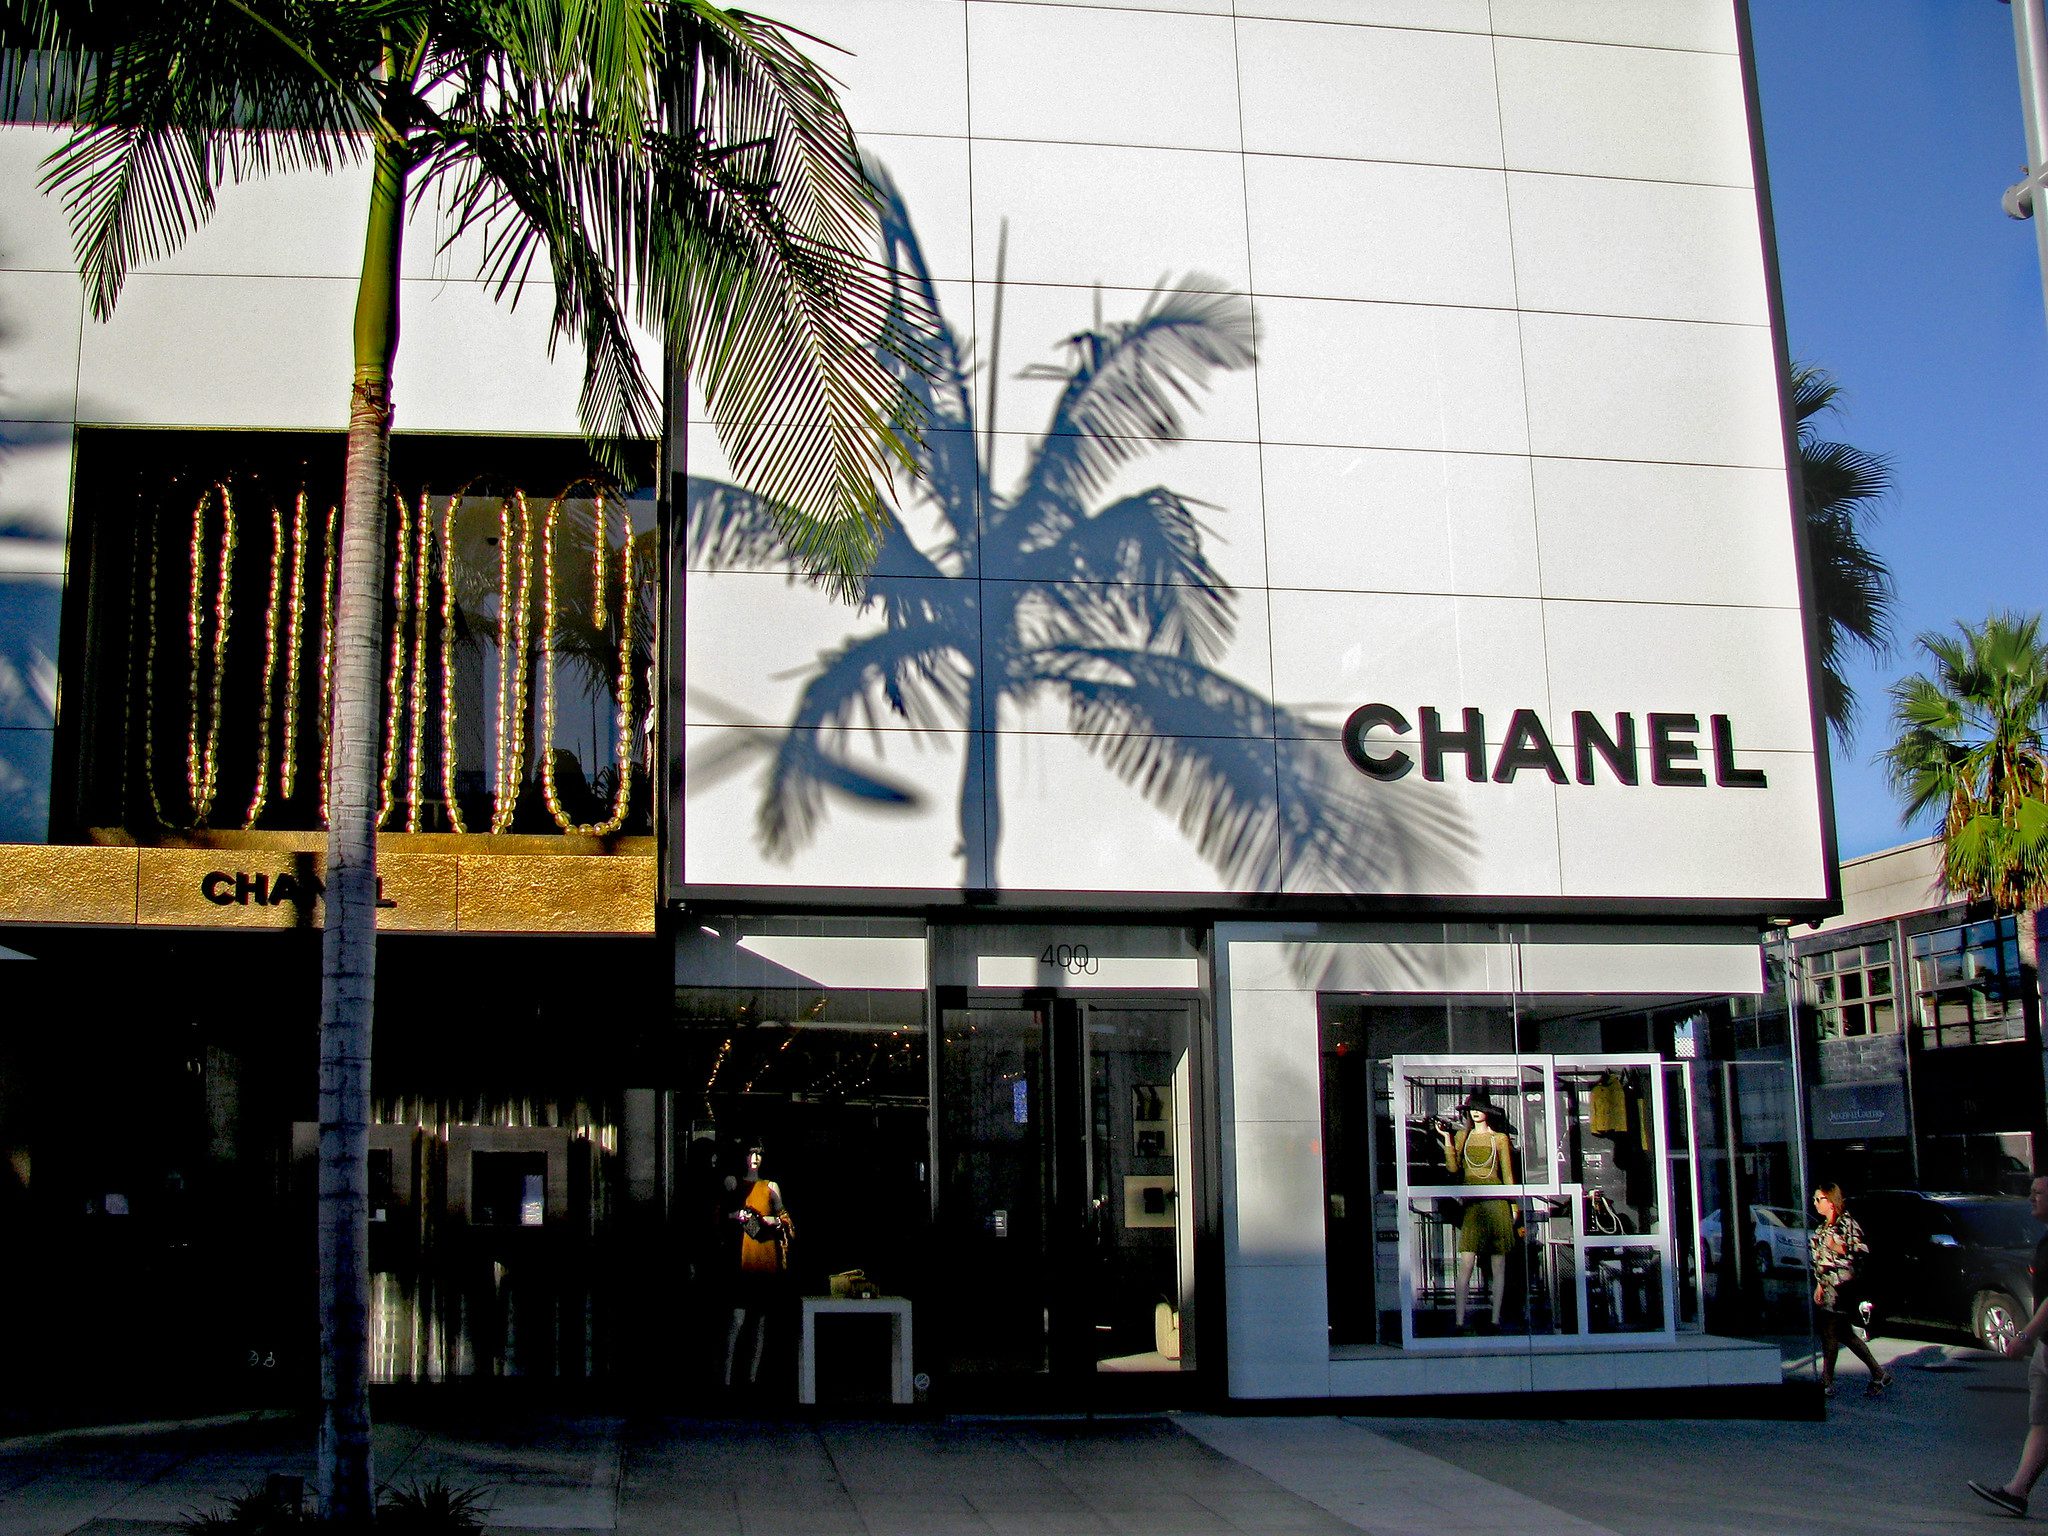 Van used to smash into Chanel store in Beverly Grove area of Los